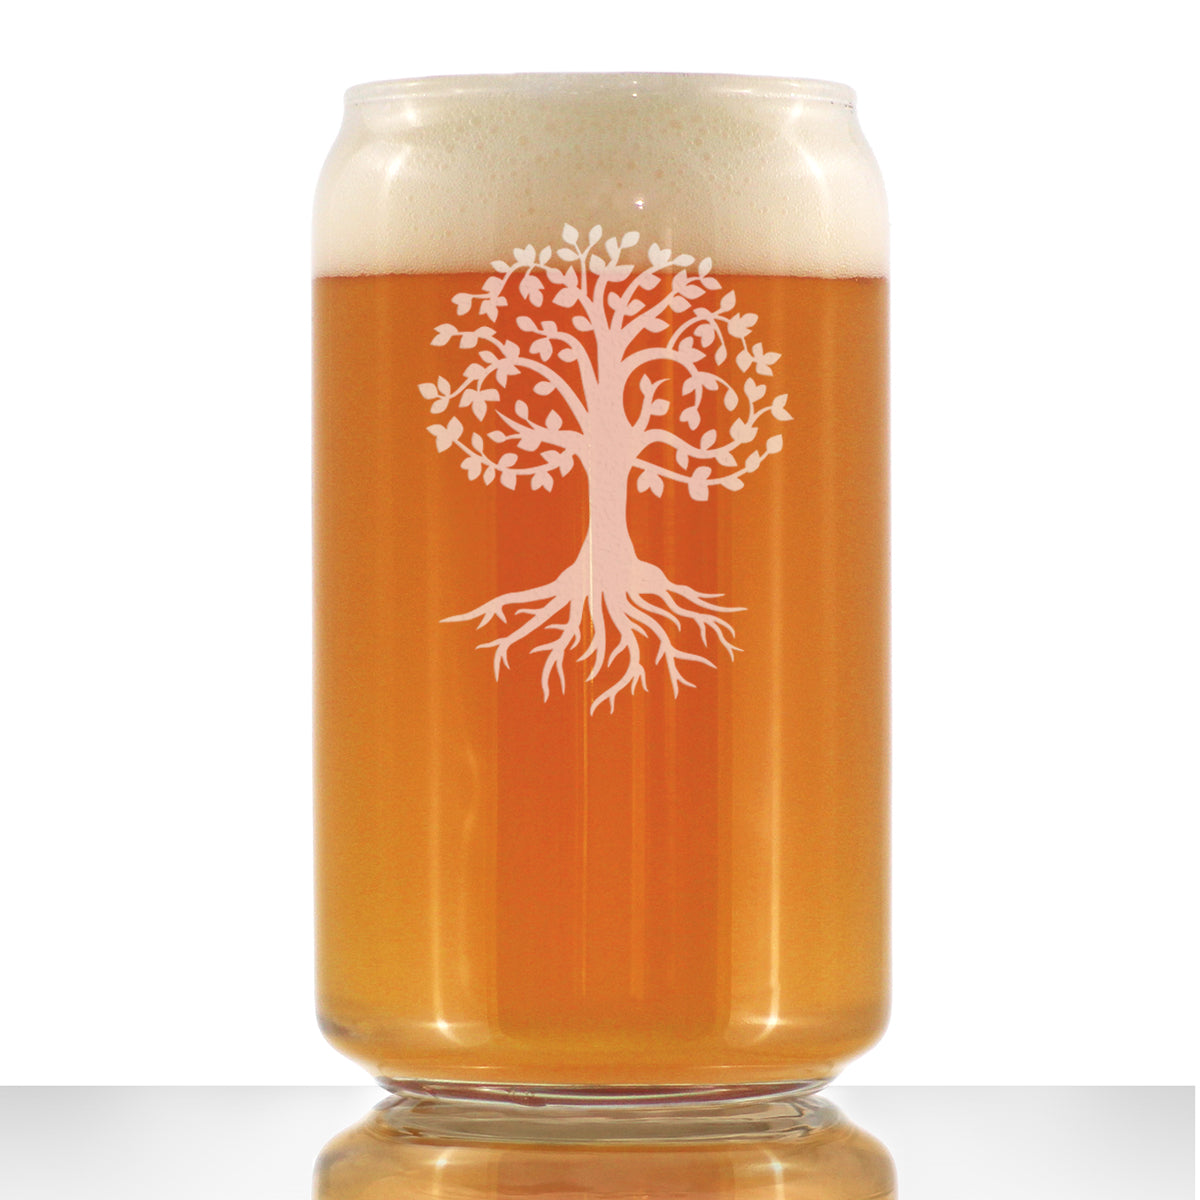 Tree Of Life - Beer Can Pint Glass - Cute Family Themed Gifts and Decor - 16 oz Glass